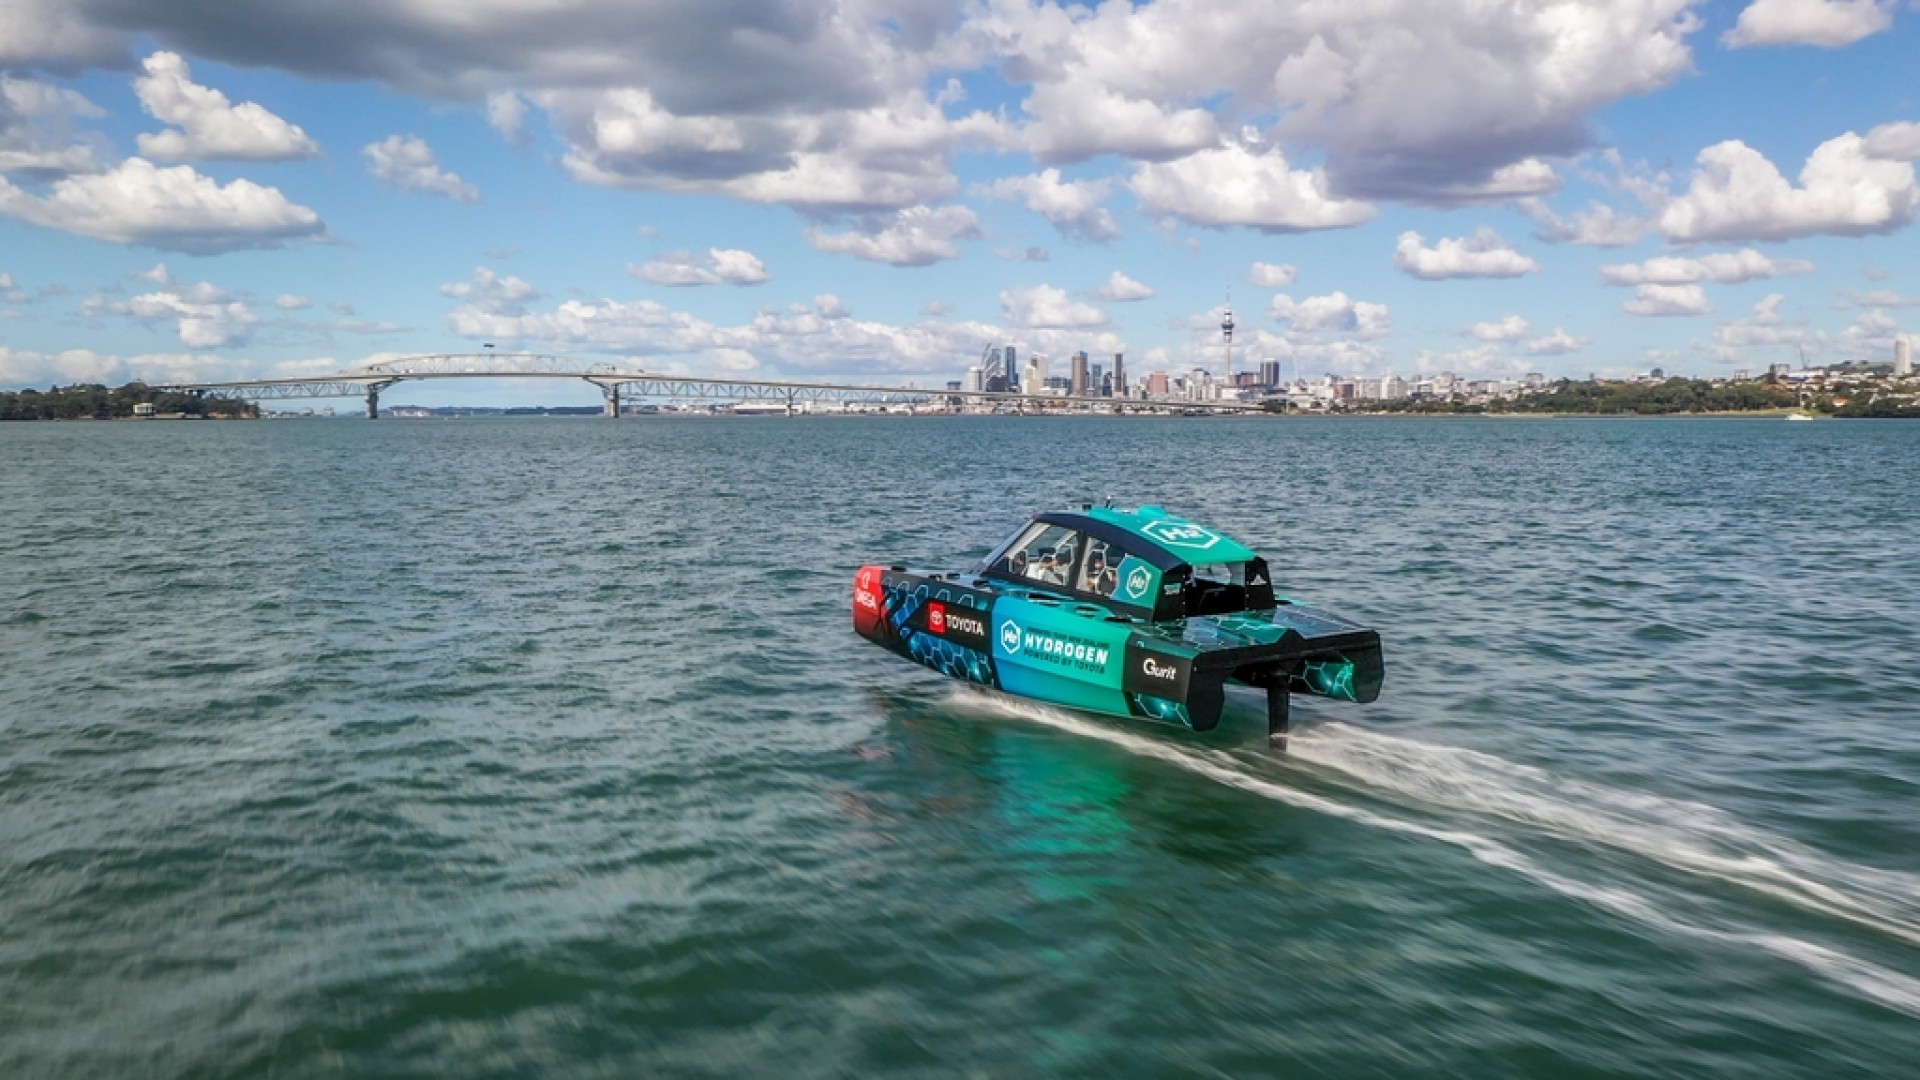 Emirates Team New Zealand take flight in hydrogen powered foiling chase boat